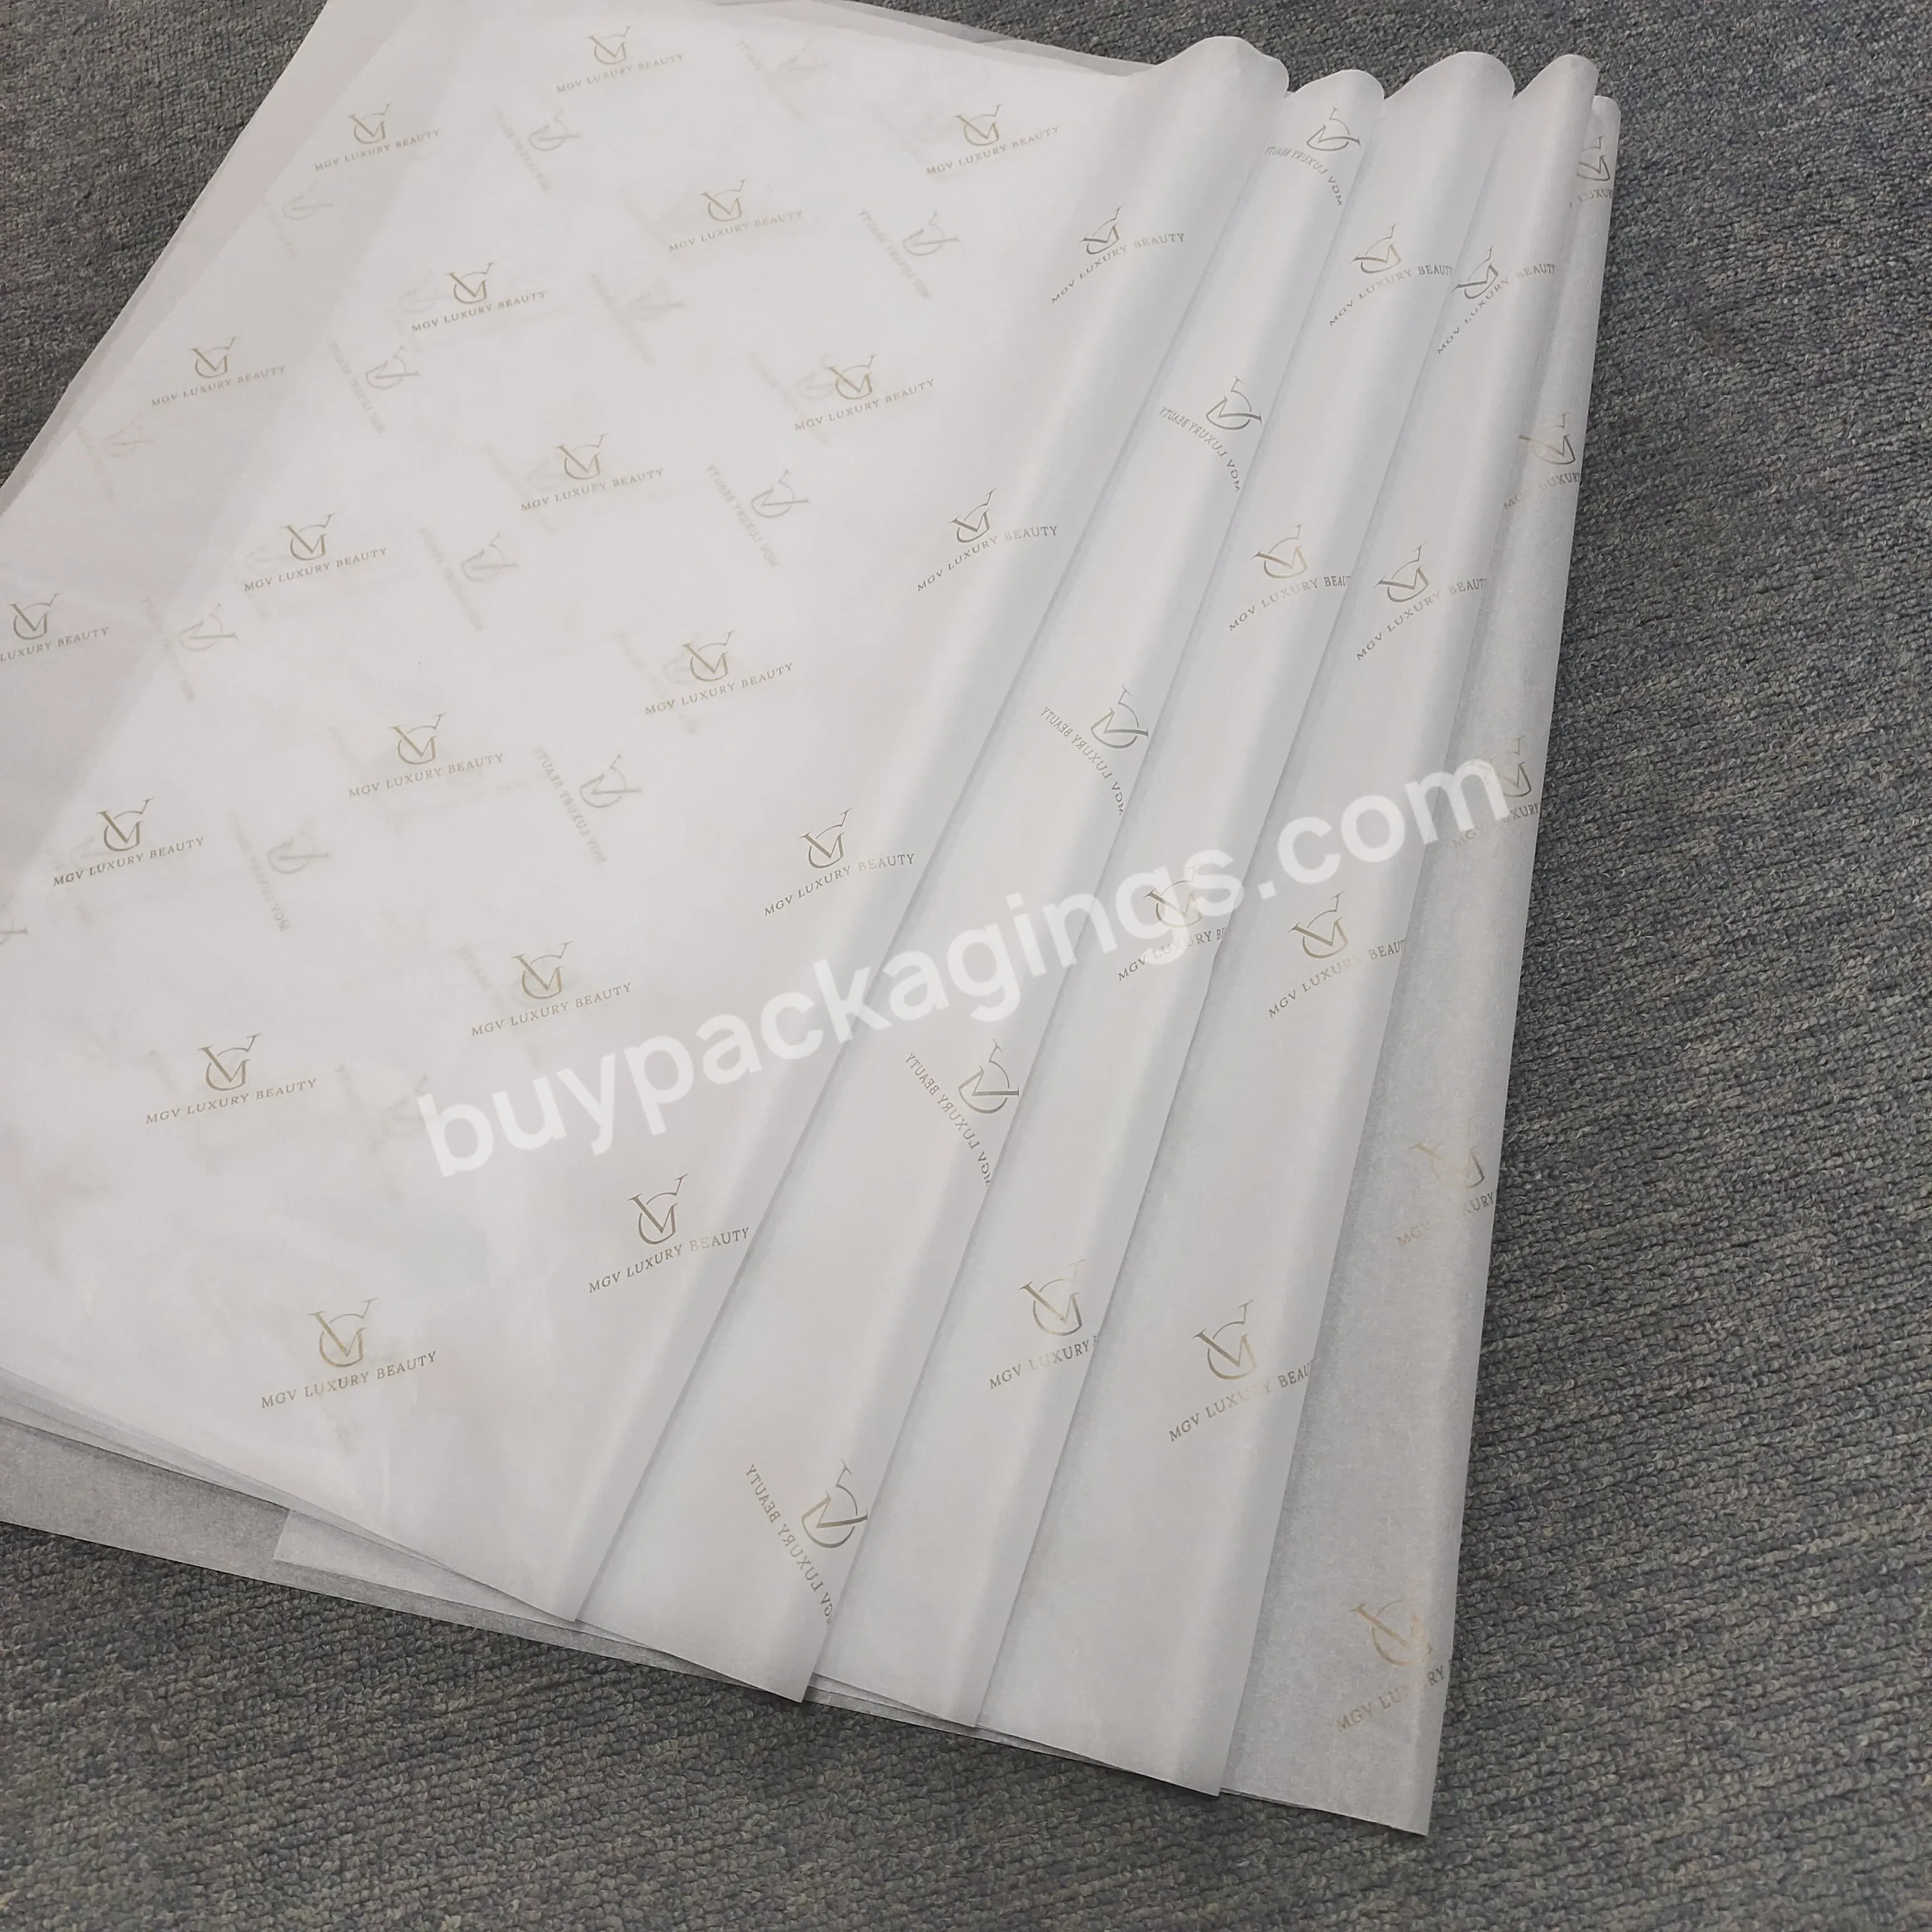 High Quality Customized Printed White Color Tissue Paper Wrapping Tissue Paper With And Black Company Logo - Buy Wrapping Flowers And Clothing,Moq Is 100 Pcs,Customized Logo And Size.